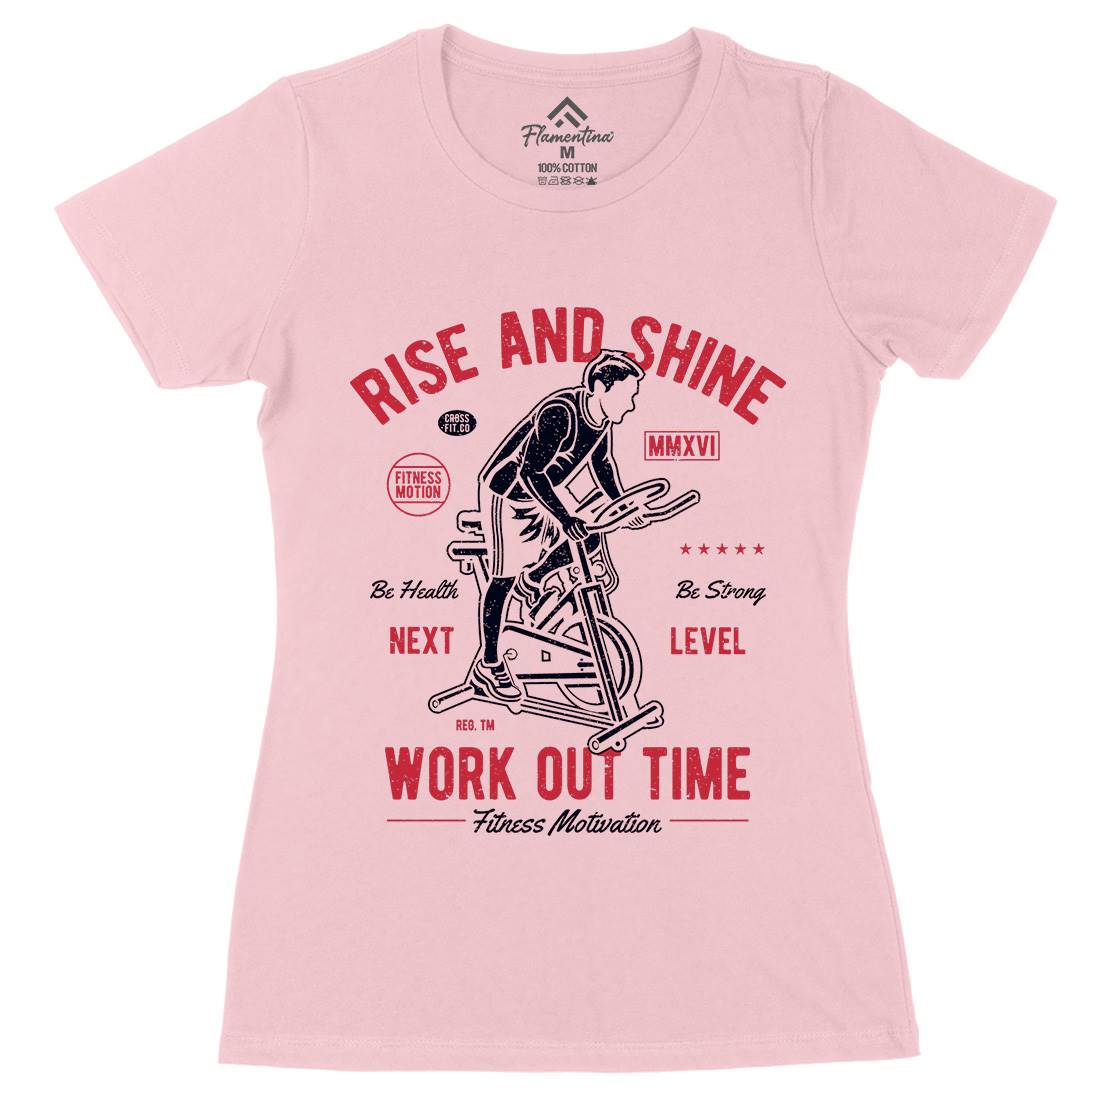 Work Out Time Womens Organic Crew Neck T-Shirt Gym A199